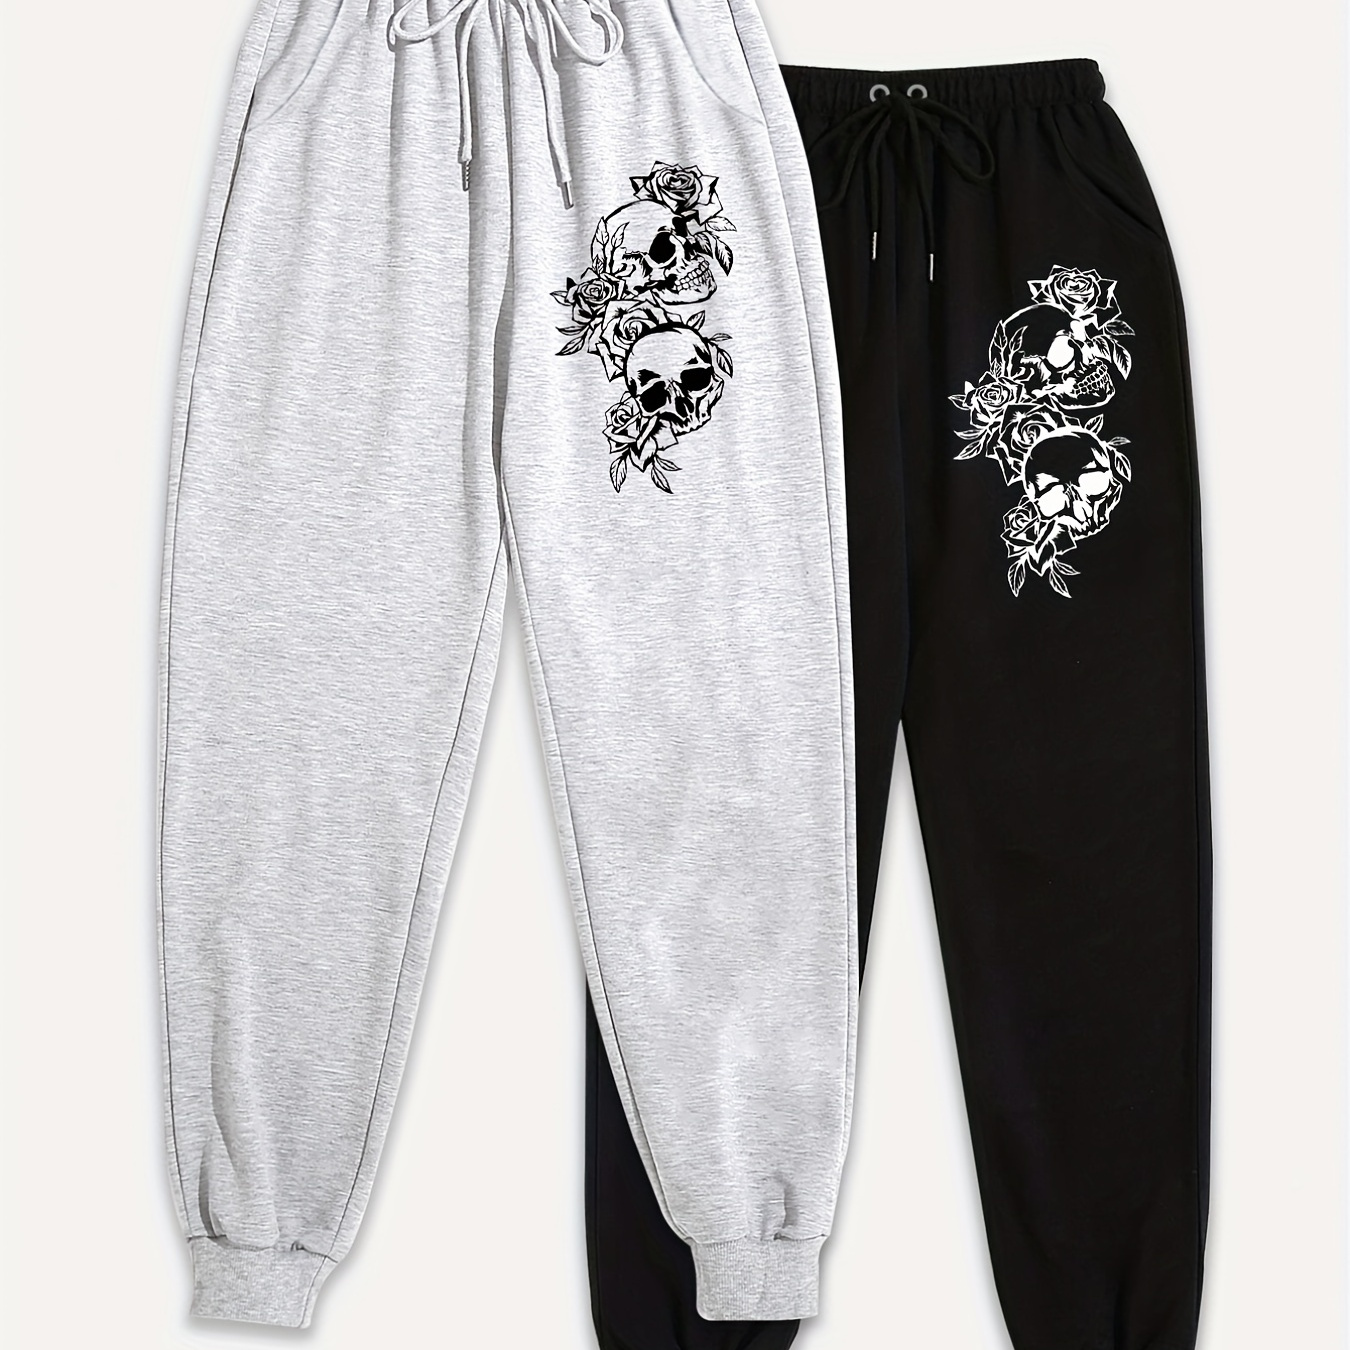 

2 Pieces Skull Print Sweatpants, Casual Drawstring Waist Jogger Pants For Spring & Fall, Women's Clothing